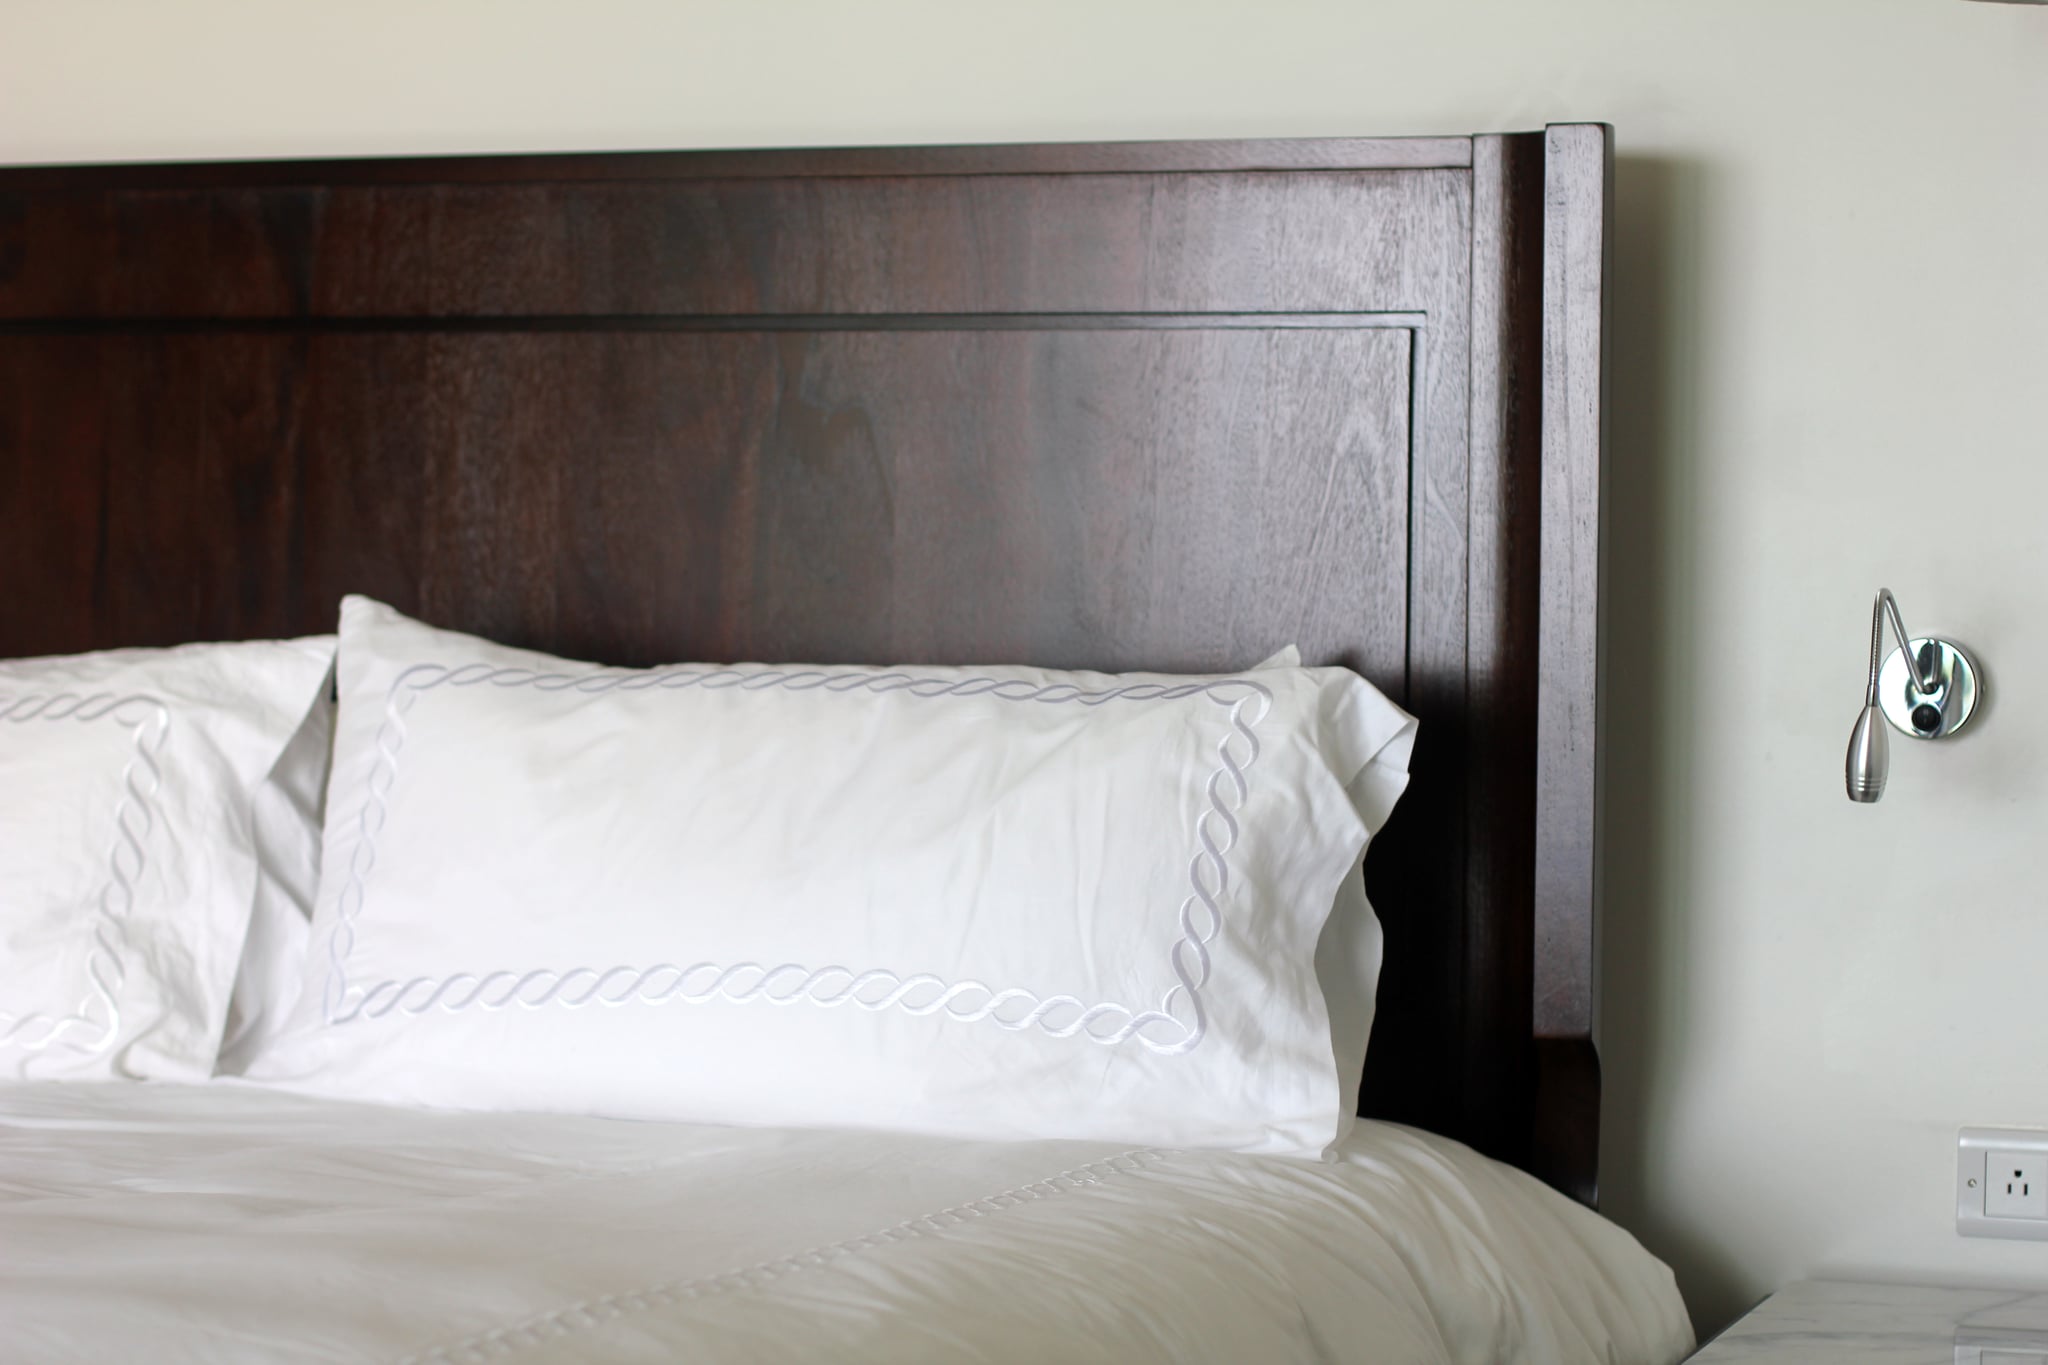 How to Bring Your Favorite Hotel Bed Home